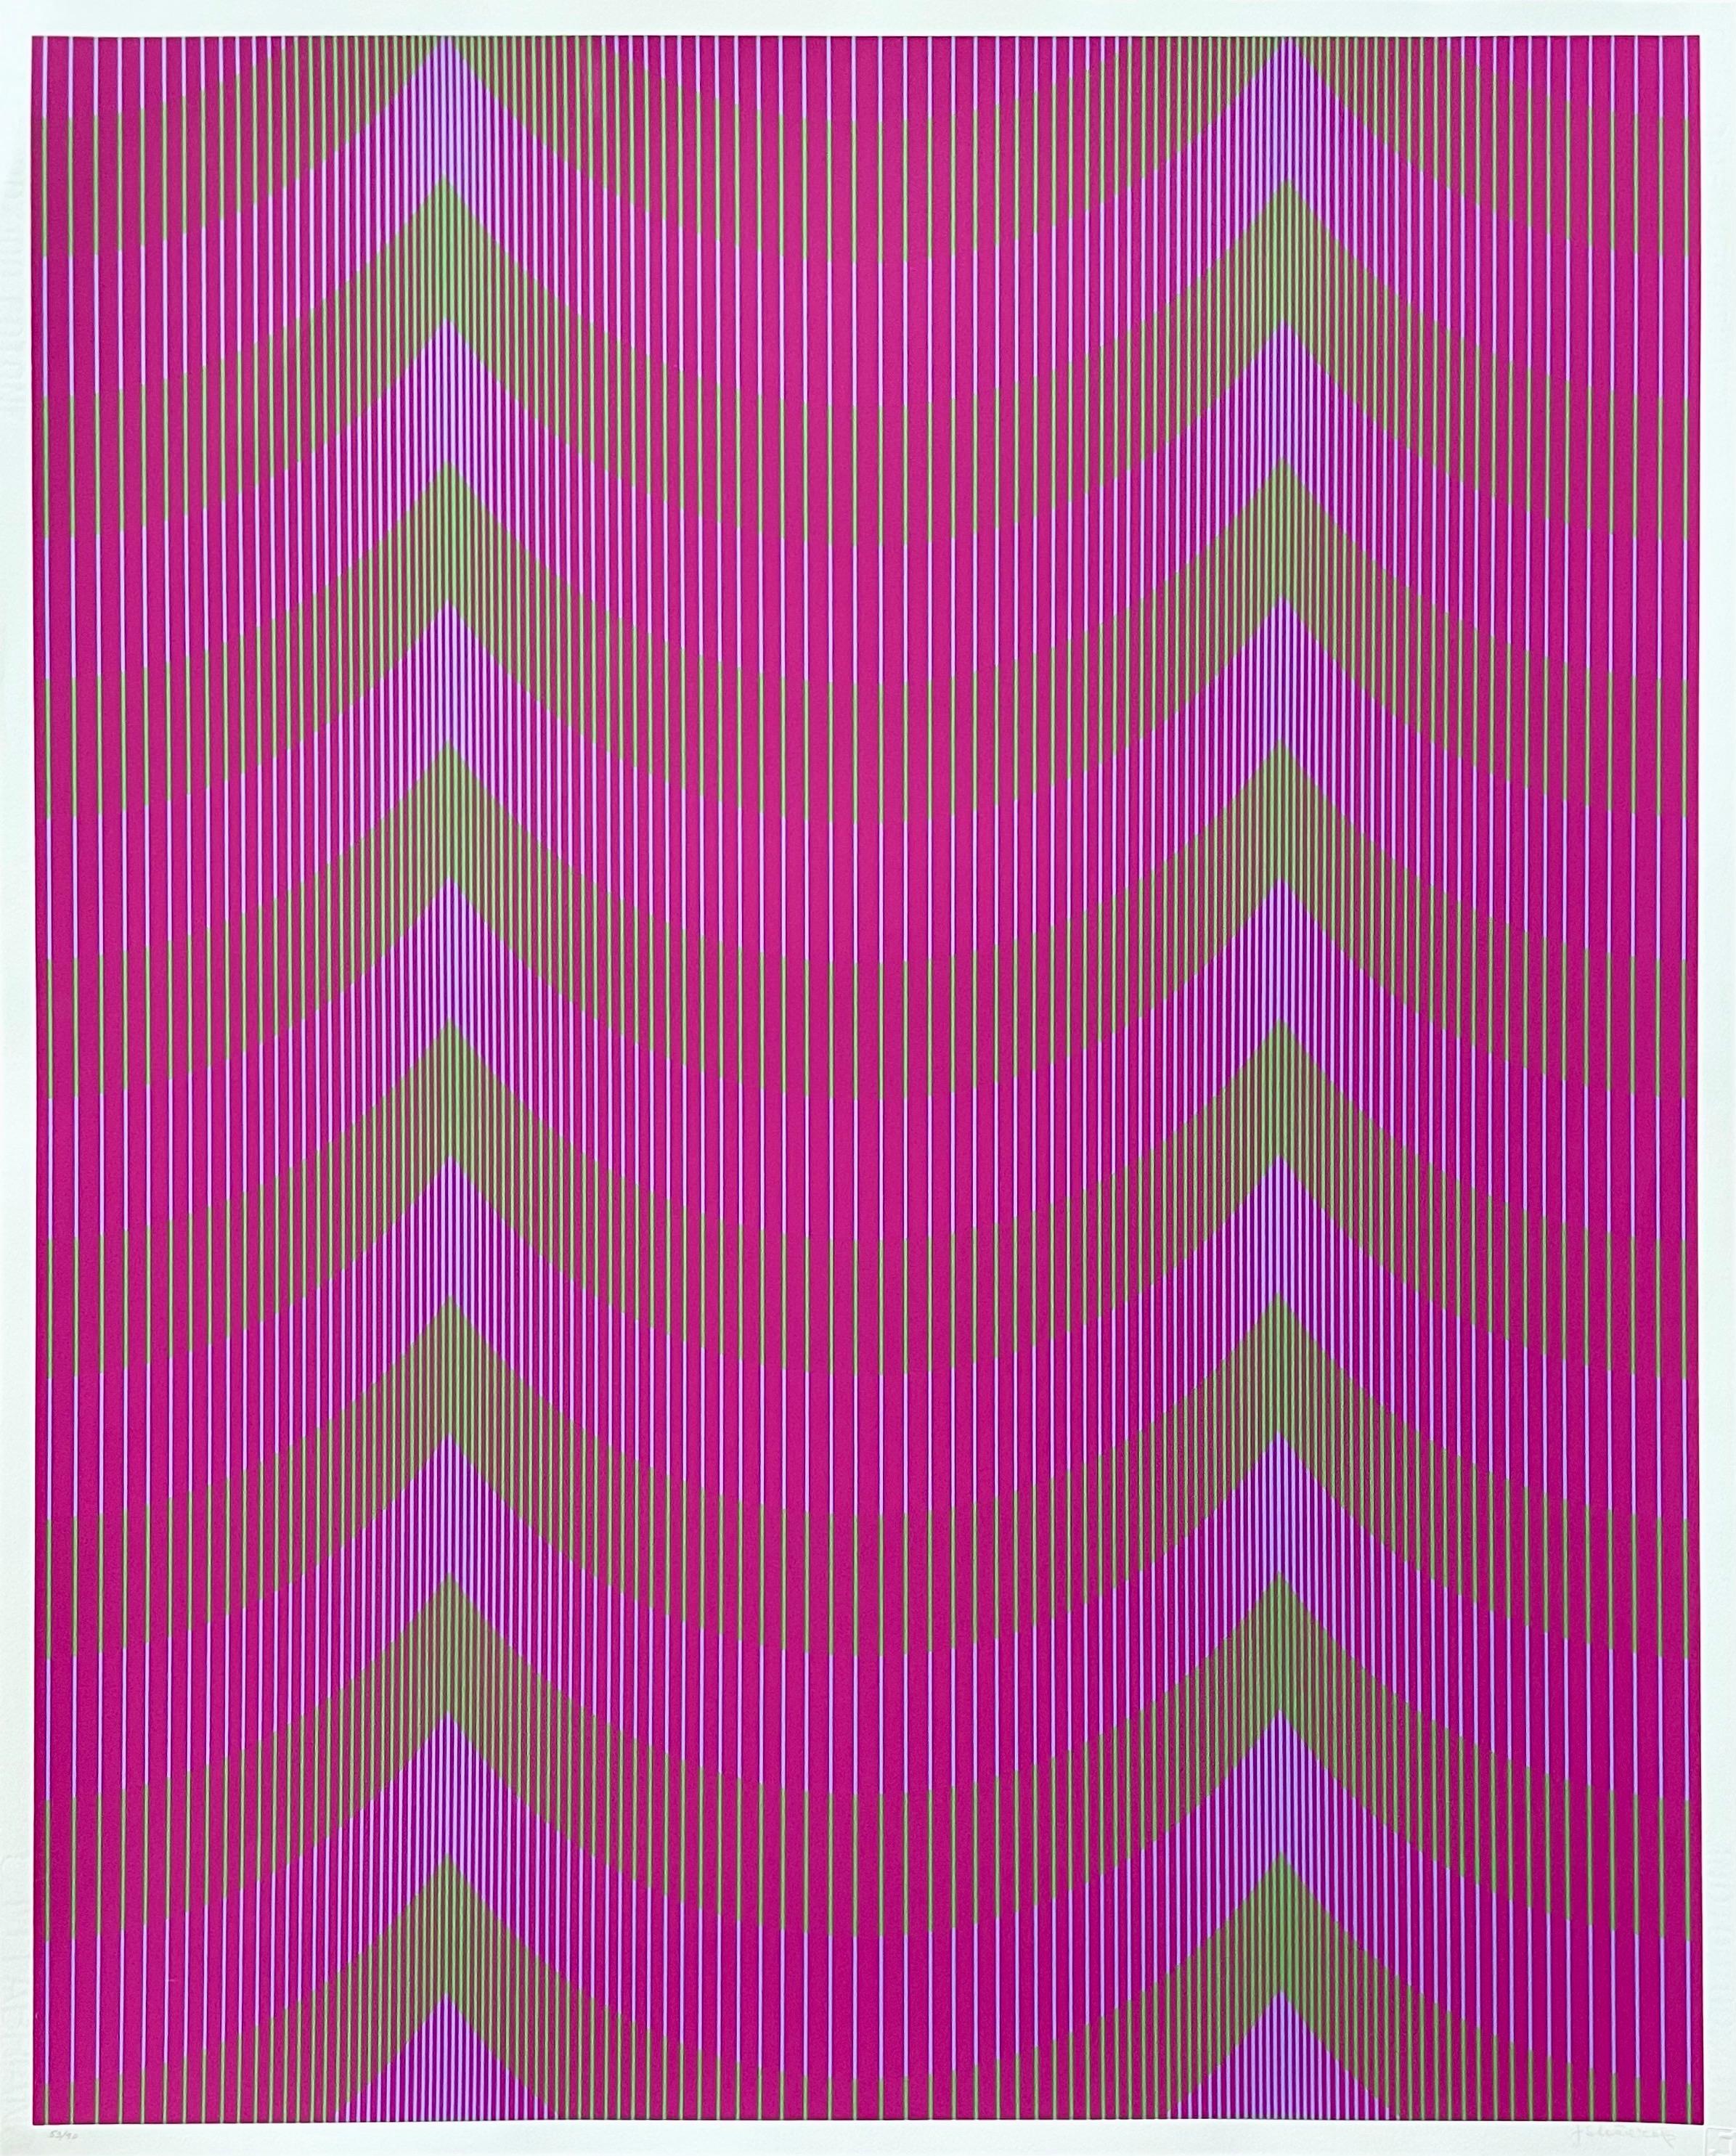 Artist: Julian Stanczak (1928-2017)
Title: Veiled (from Twelve Progressions)
Year: 1971
Edition: 53/90, plus proofs
Medium: Three color silkscreen on Fabriano paper
Size: 32.25 x 26 inches
Condition: Good
Inscription: Signed and numbered by the